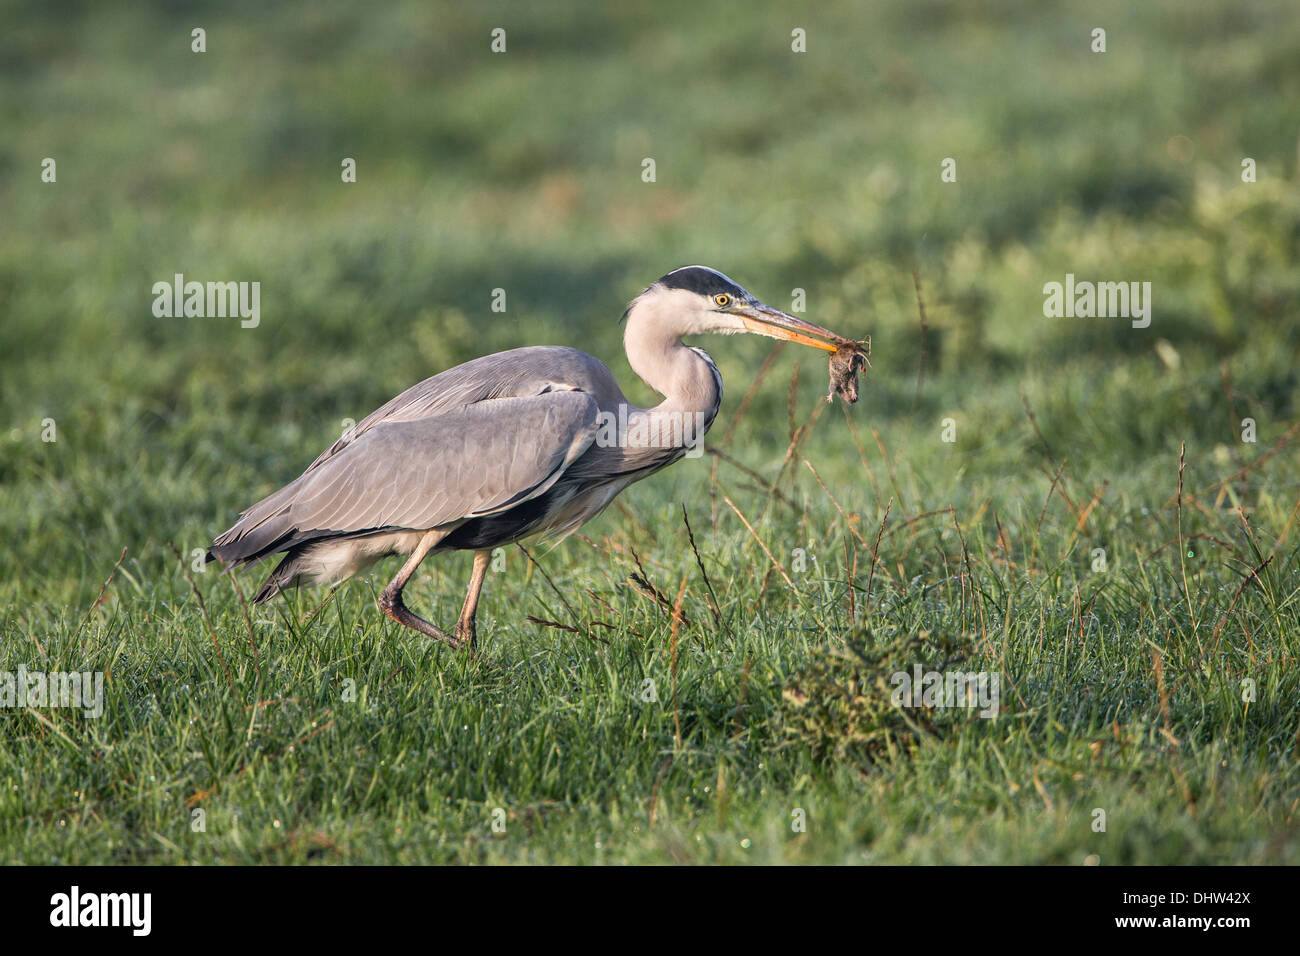 Netherlands, Weesp, grey heron catching mouse Stock Photo